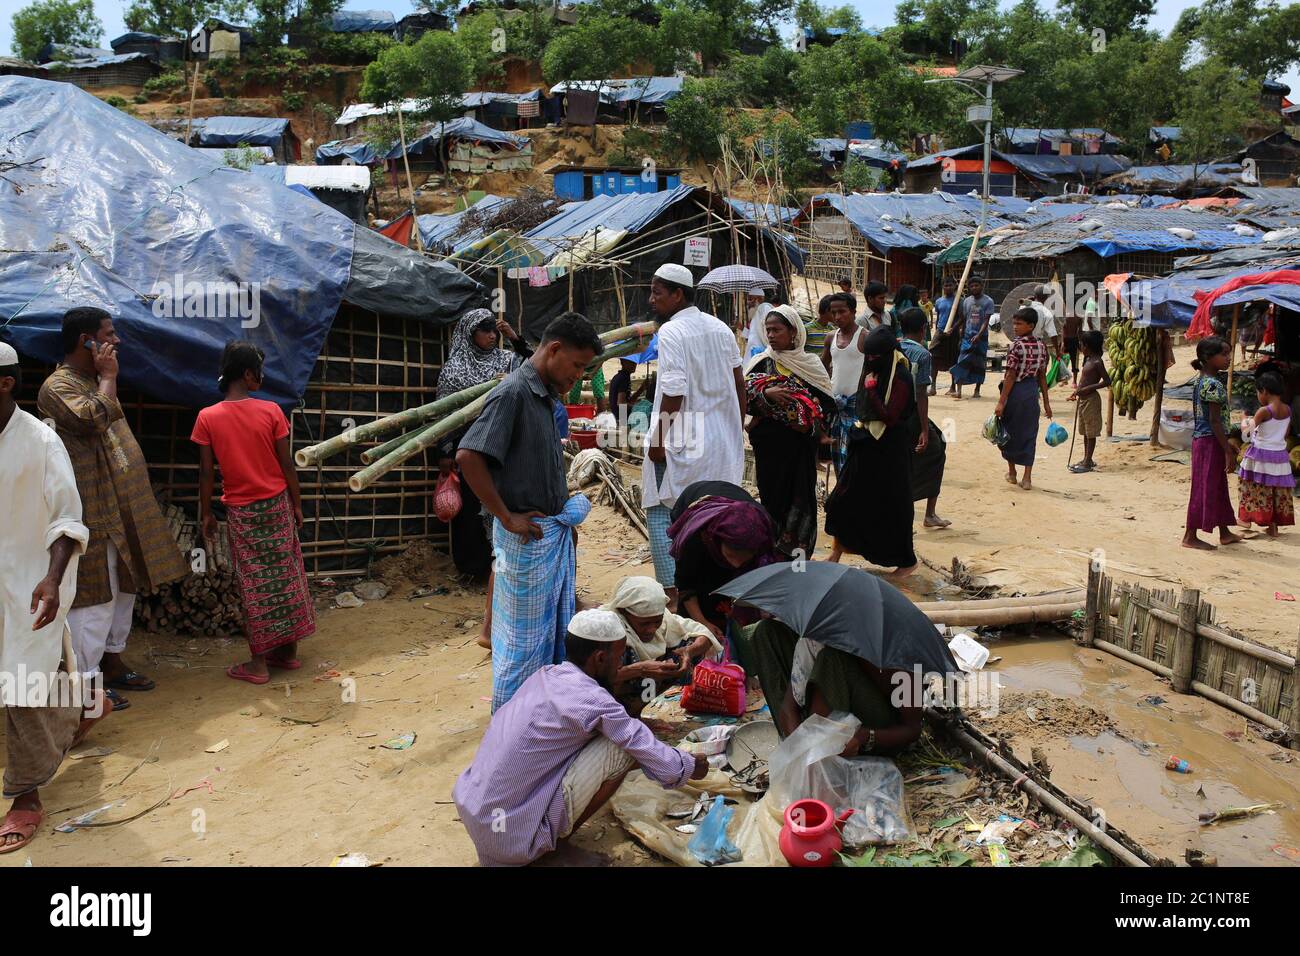 Rohingya people's daily life at Thangkhali refugee camp in Cox's Bazar, Bangladesh, Thursday, Oct. 5, 2017. Stock Photo